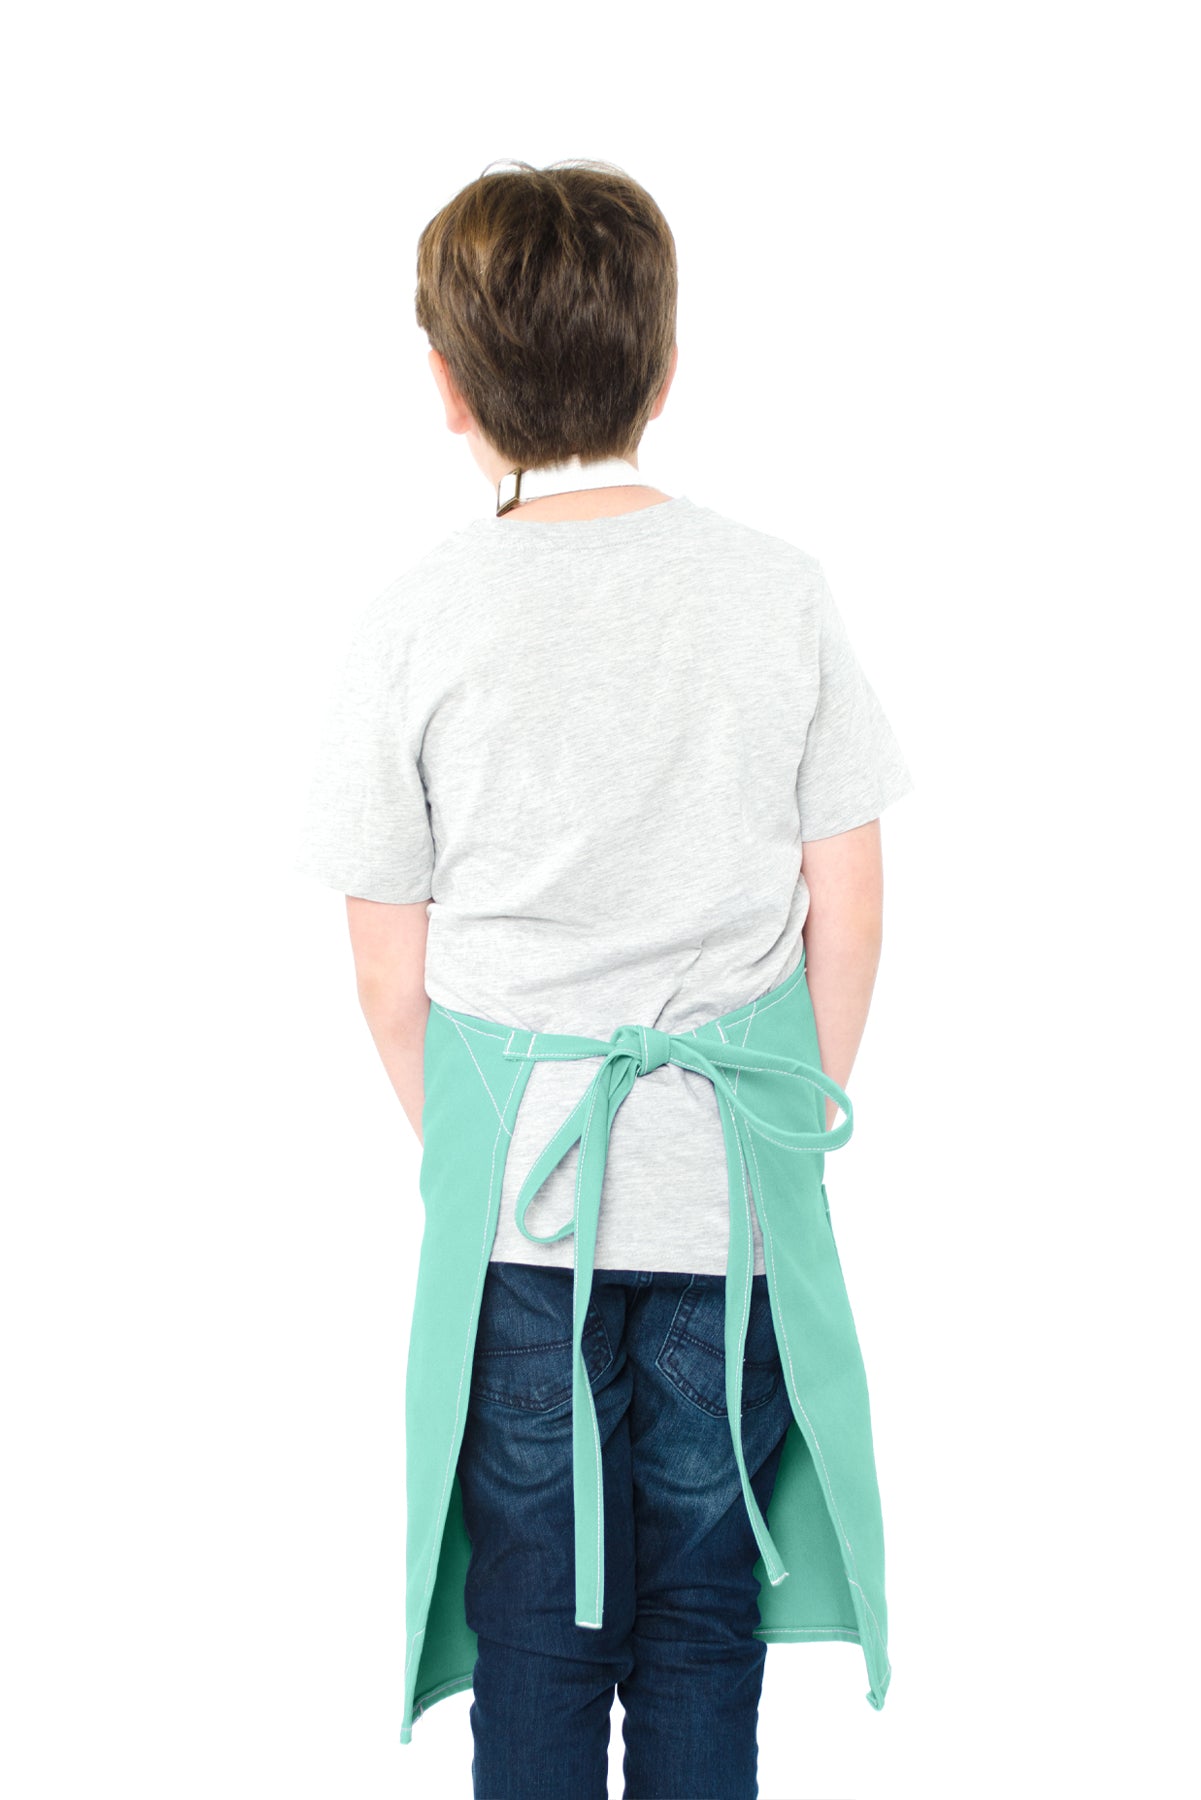 Lucca Kids Apron 8-12 Years Mint